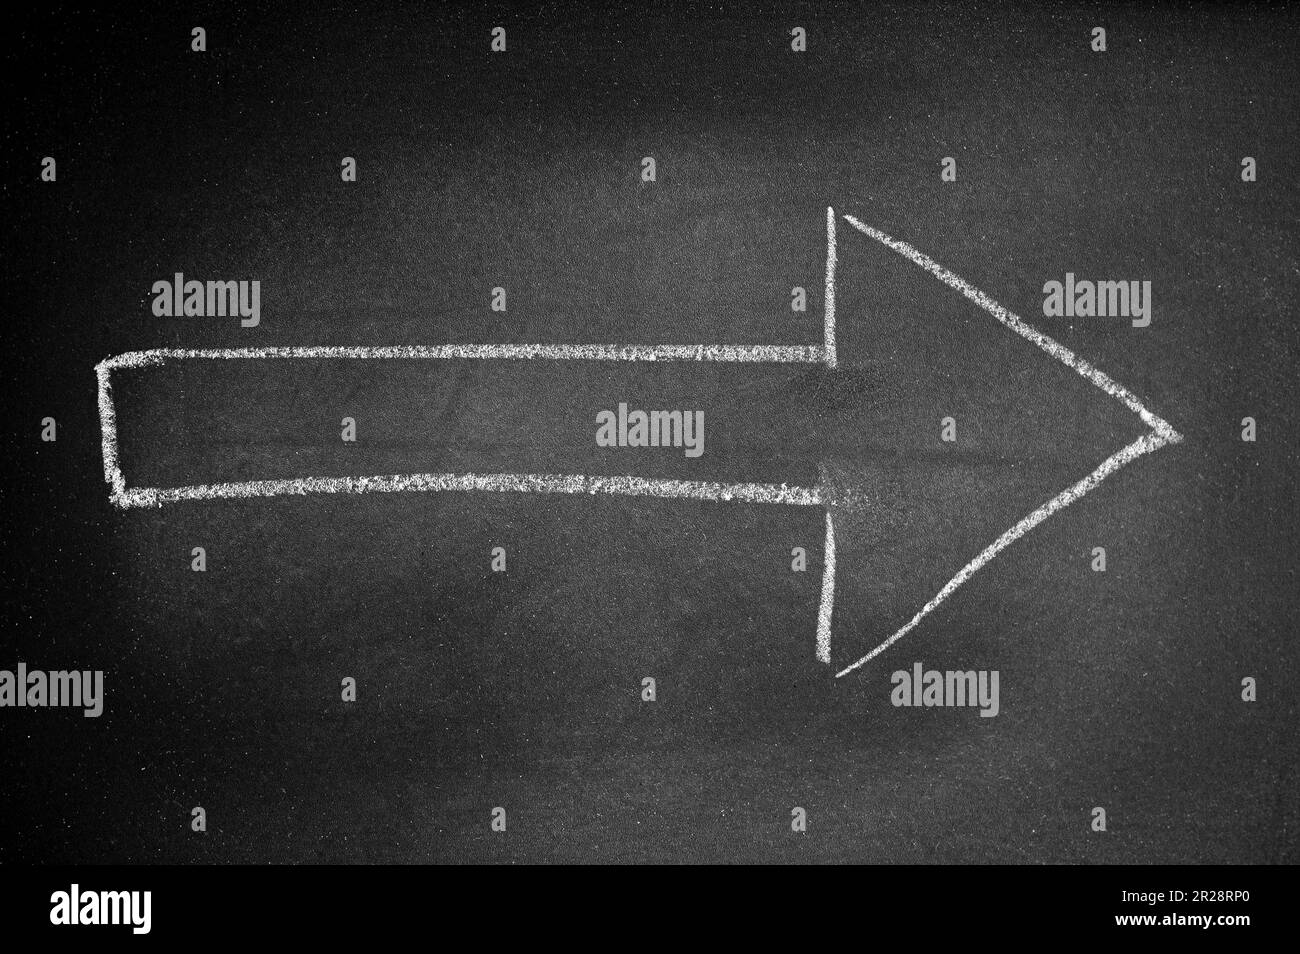 White arrow drawn on a black board with chalk indicating a direction Stock Photo